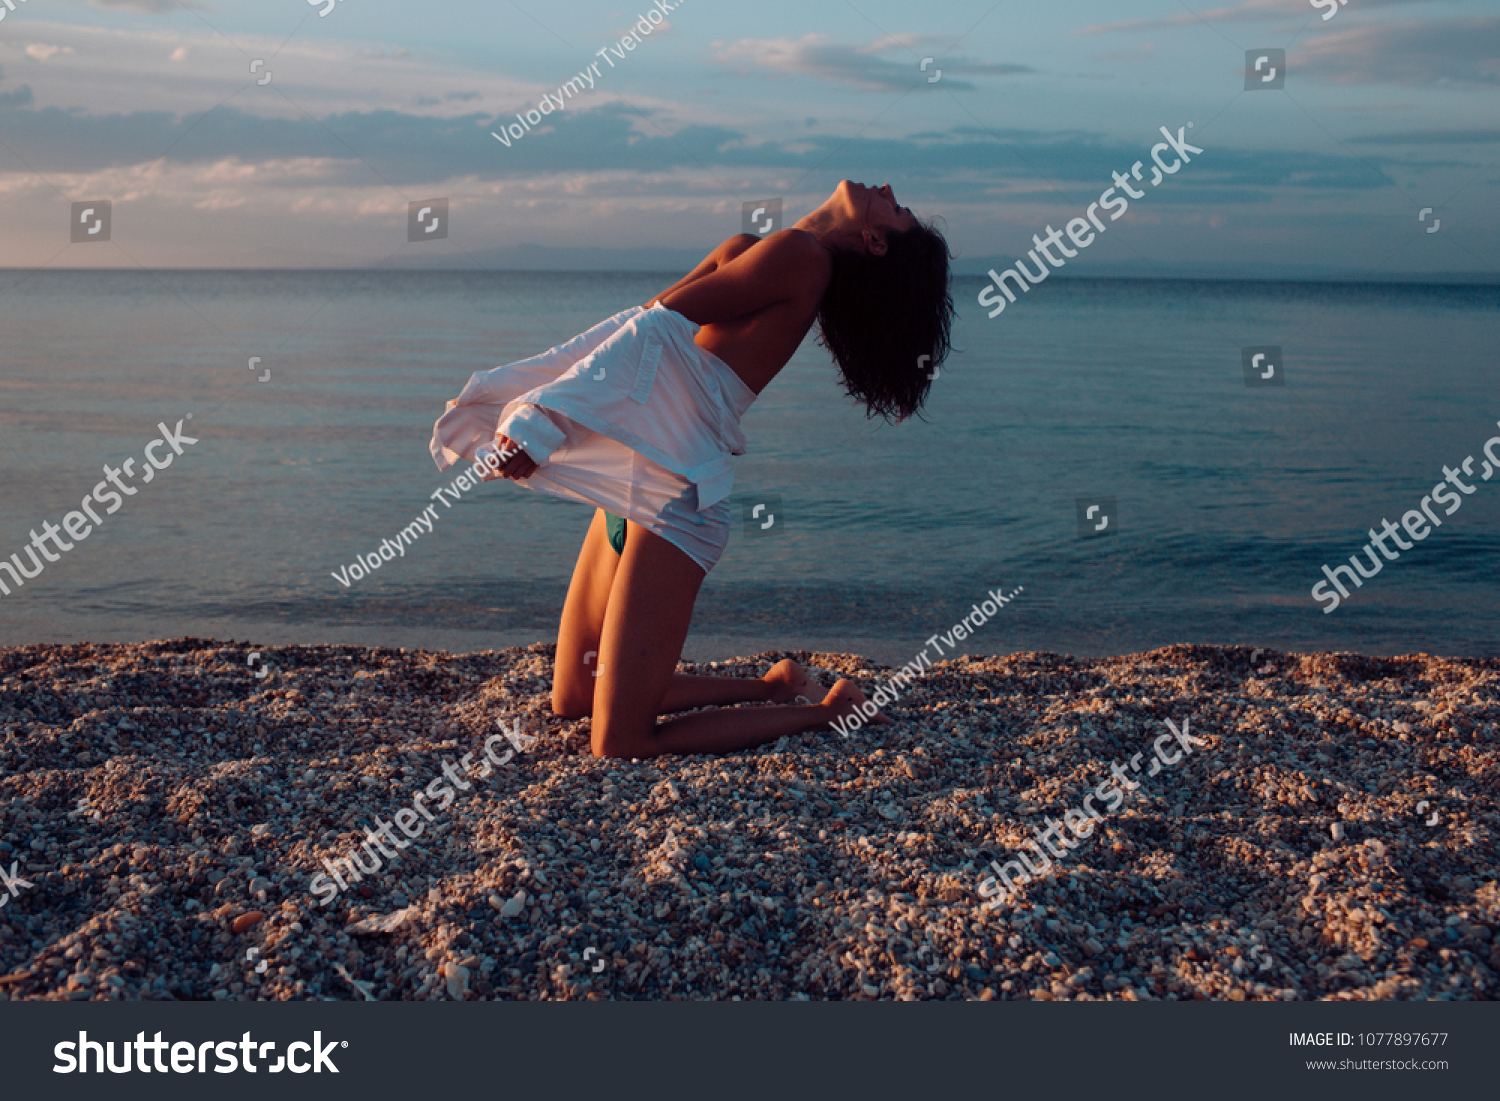 Attractive young lady suntanning nude, nudist, enjoy last sun rays. Woman stands on knees on beach in evening. Girl sexy, topless, naked breasts with wild hair at seashore at sunset. Erotic concept. #1077897677